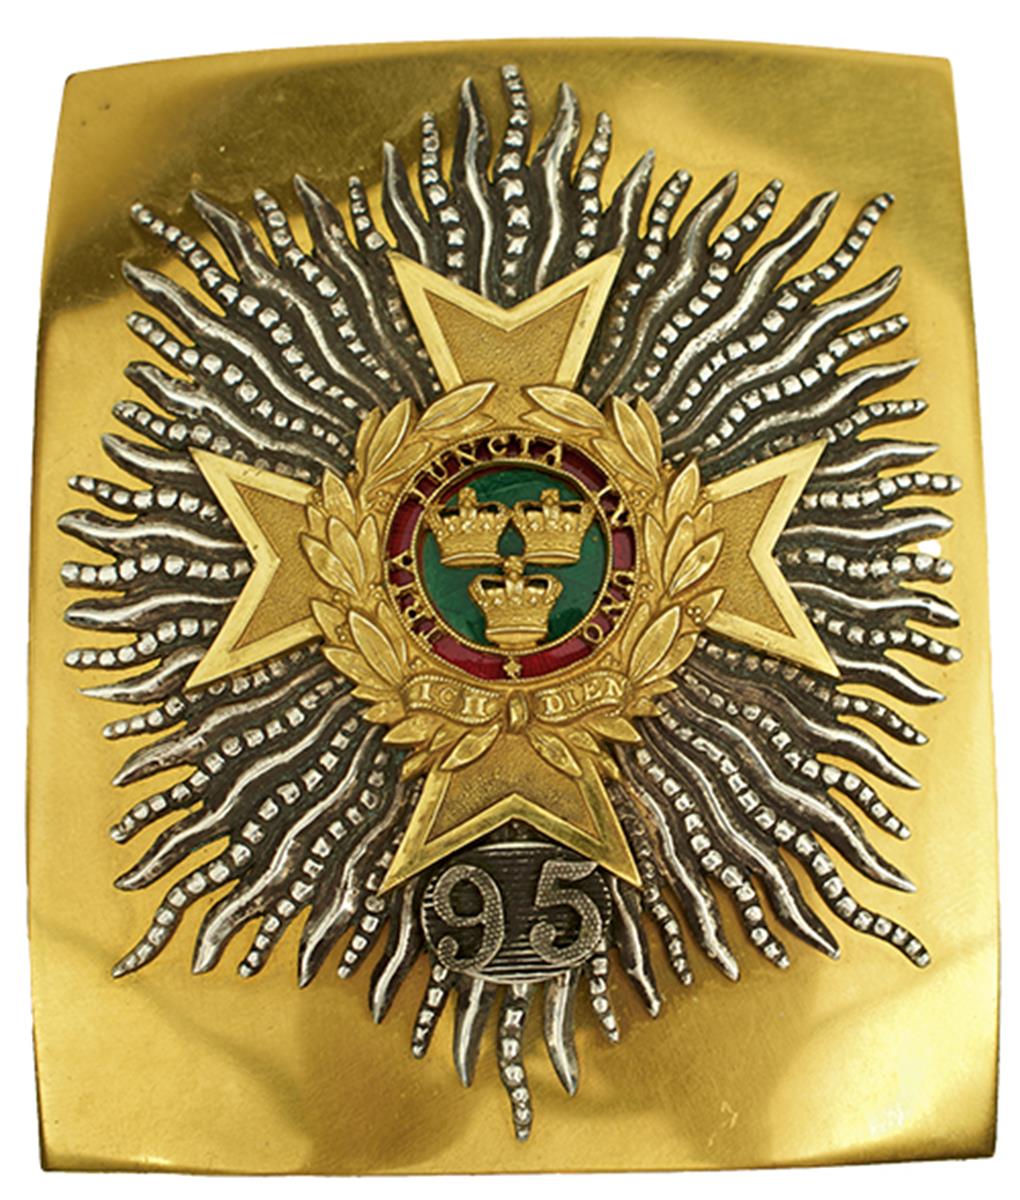 A 95TH REGIMENT OF FOOT (DERBYSHIRE) OFFICER'S SHOULDER BELT PLATE, the gilt plate applied with a